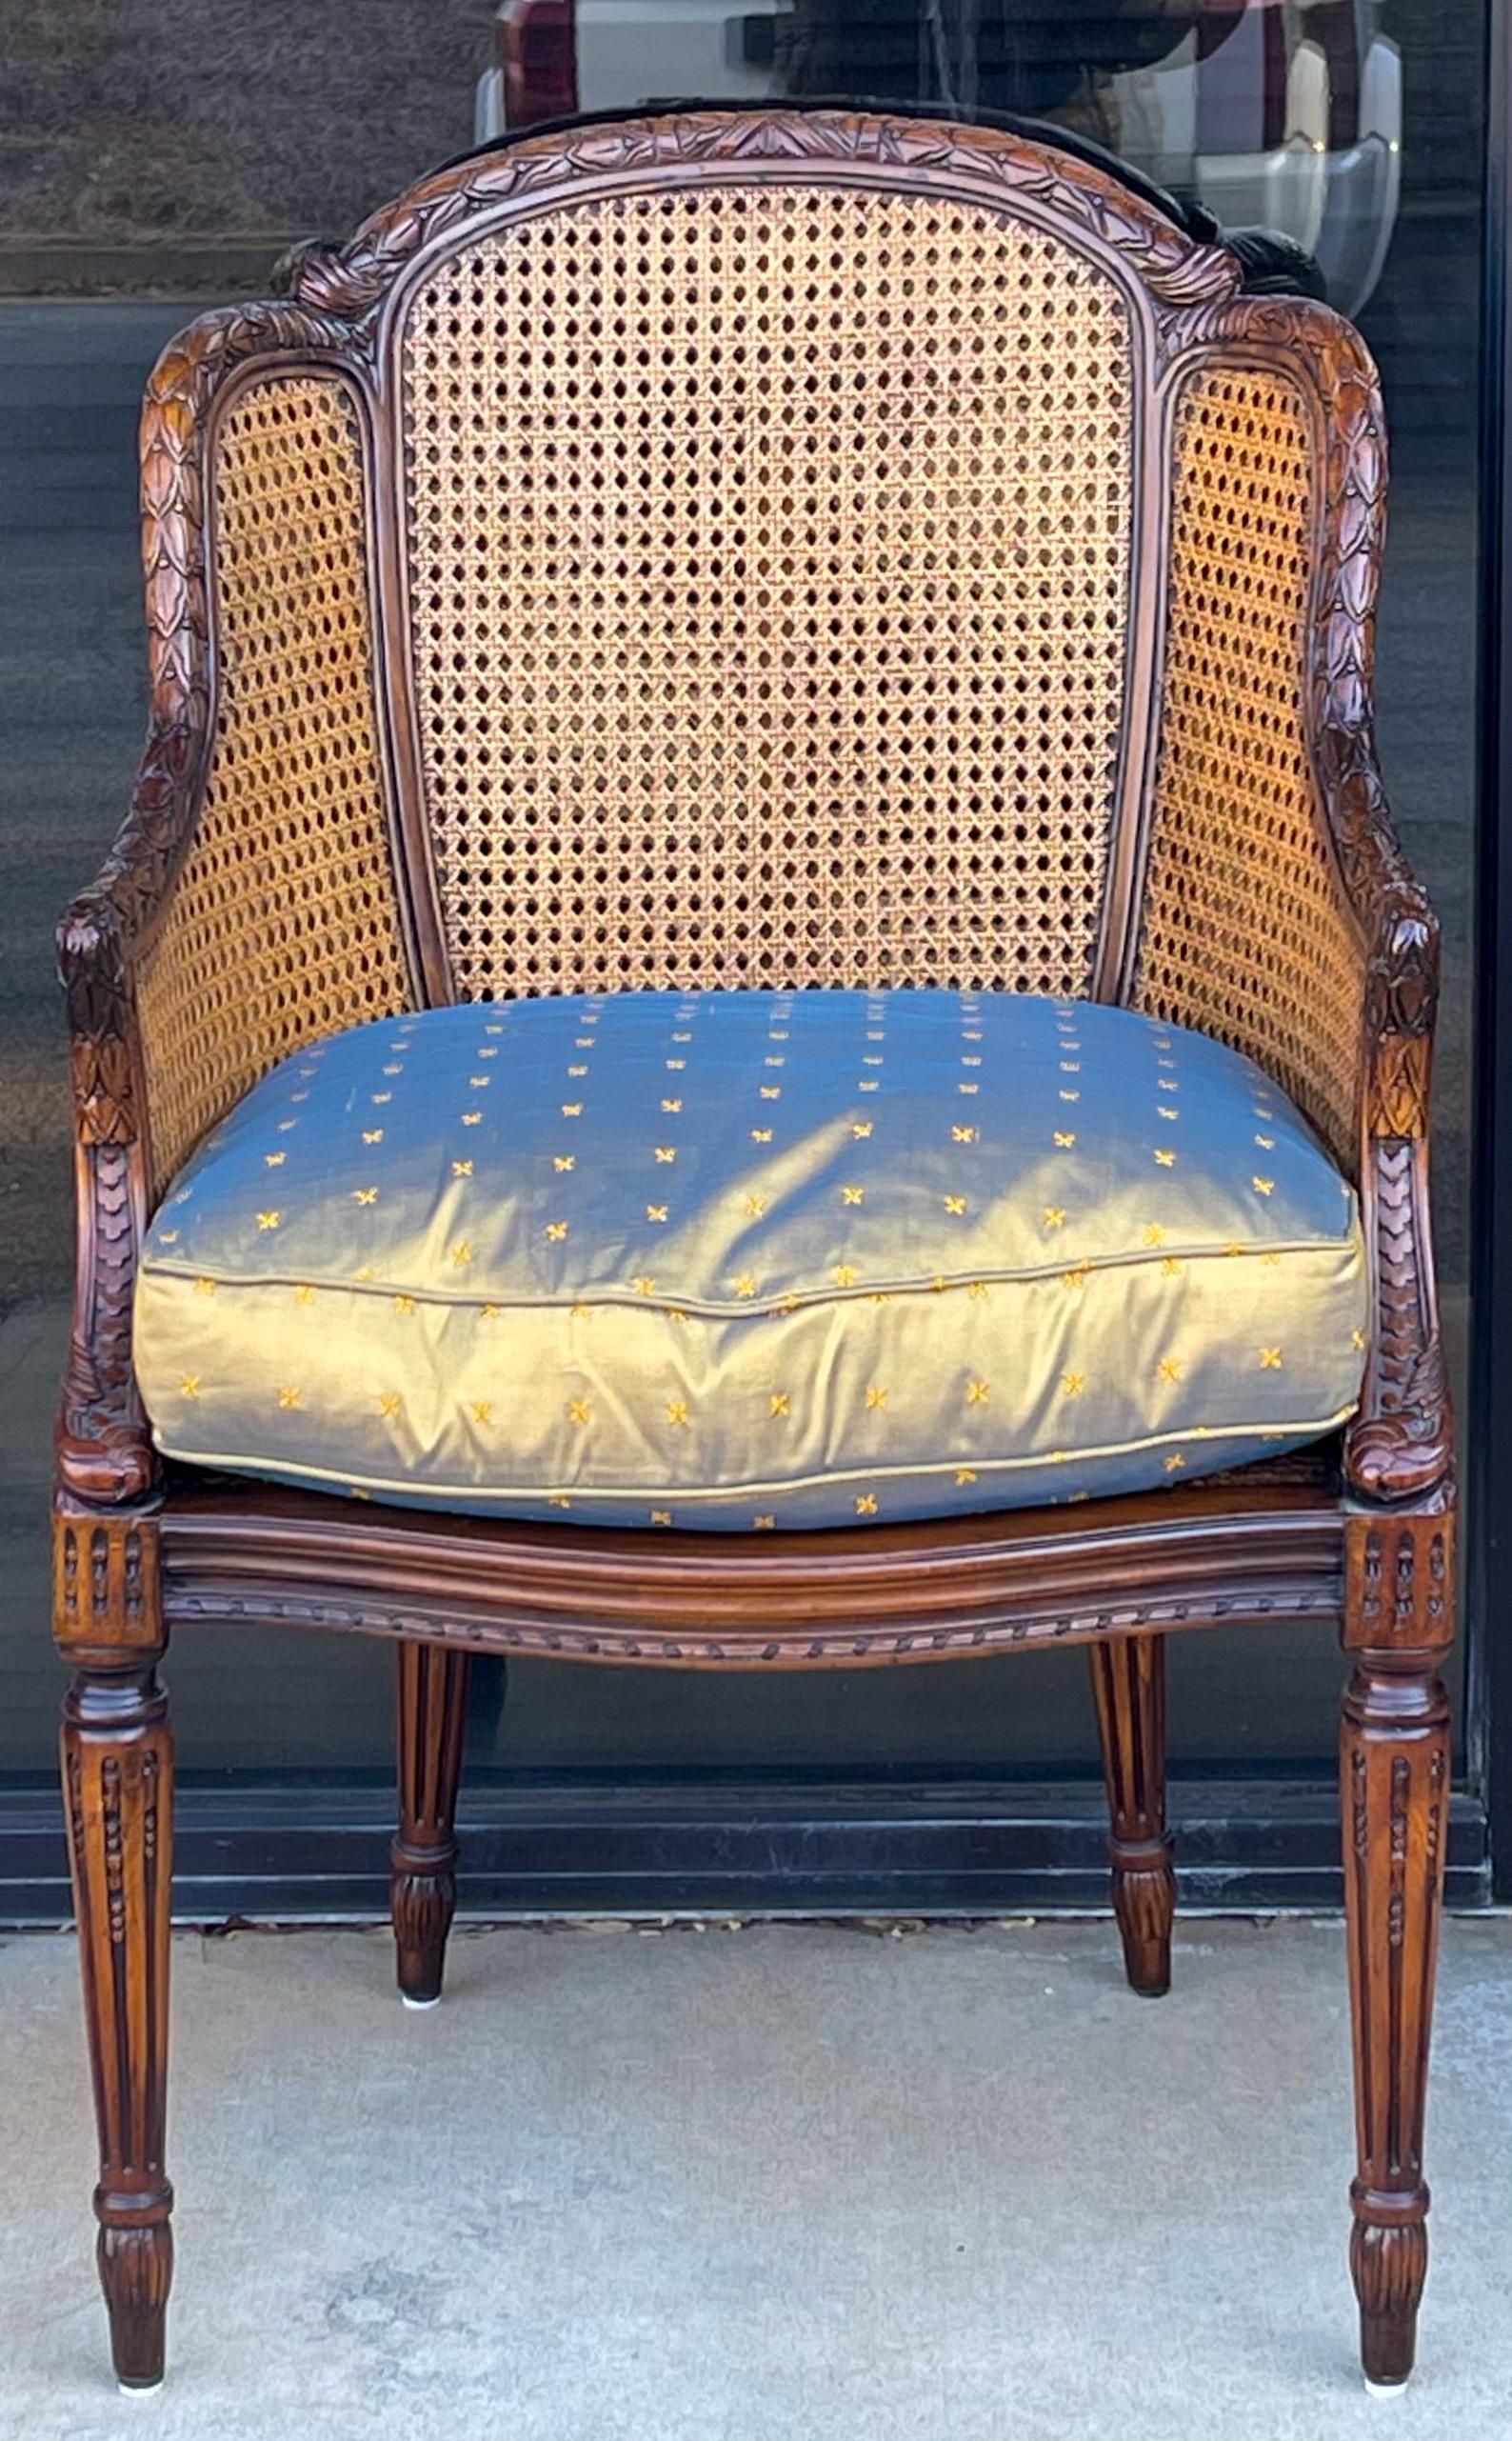 Louis XVI 20th Century French Style Double Cane Chairs By Maitland-Smith, Pair